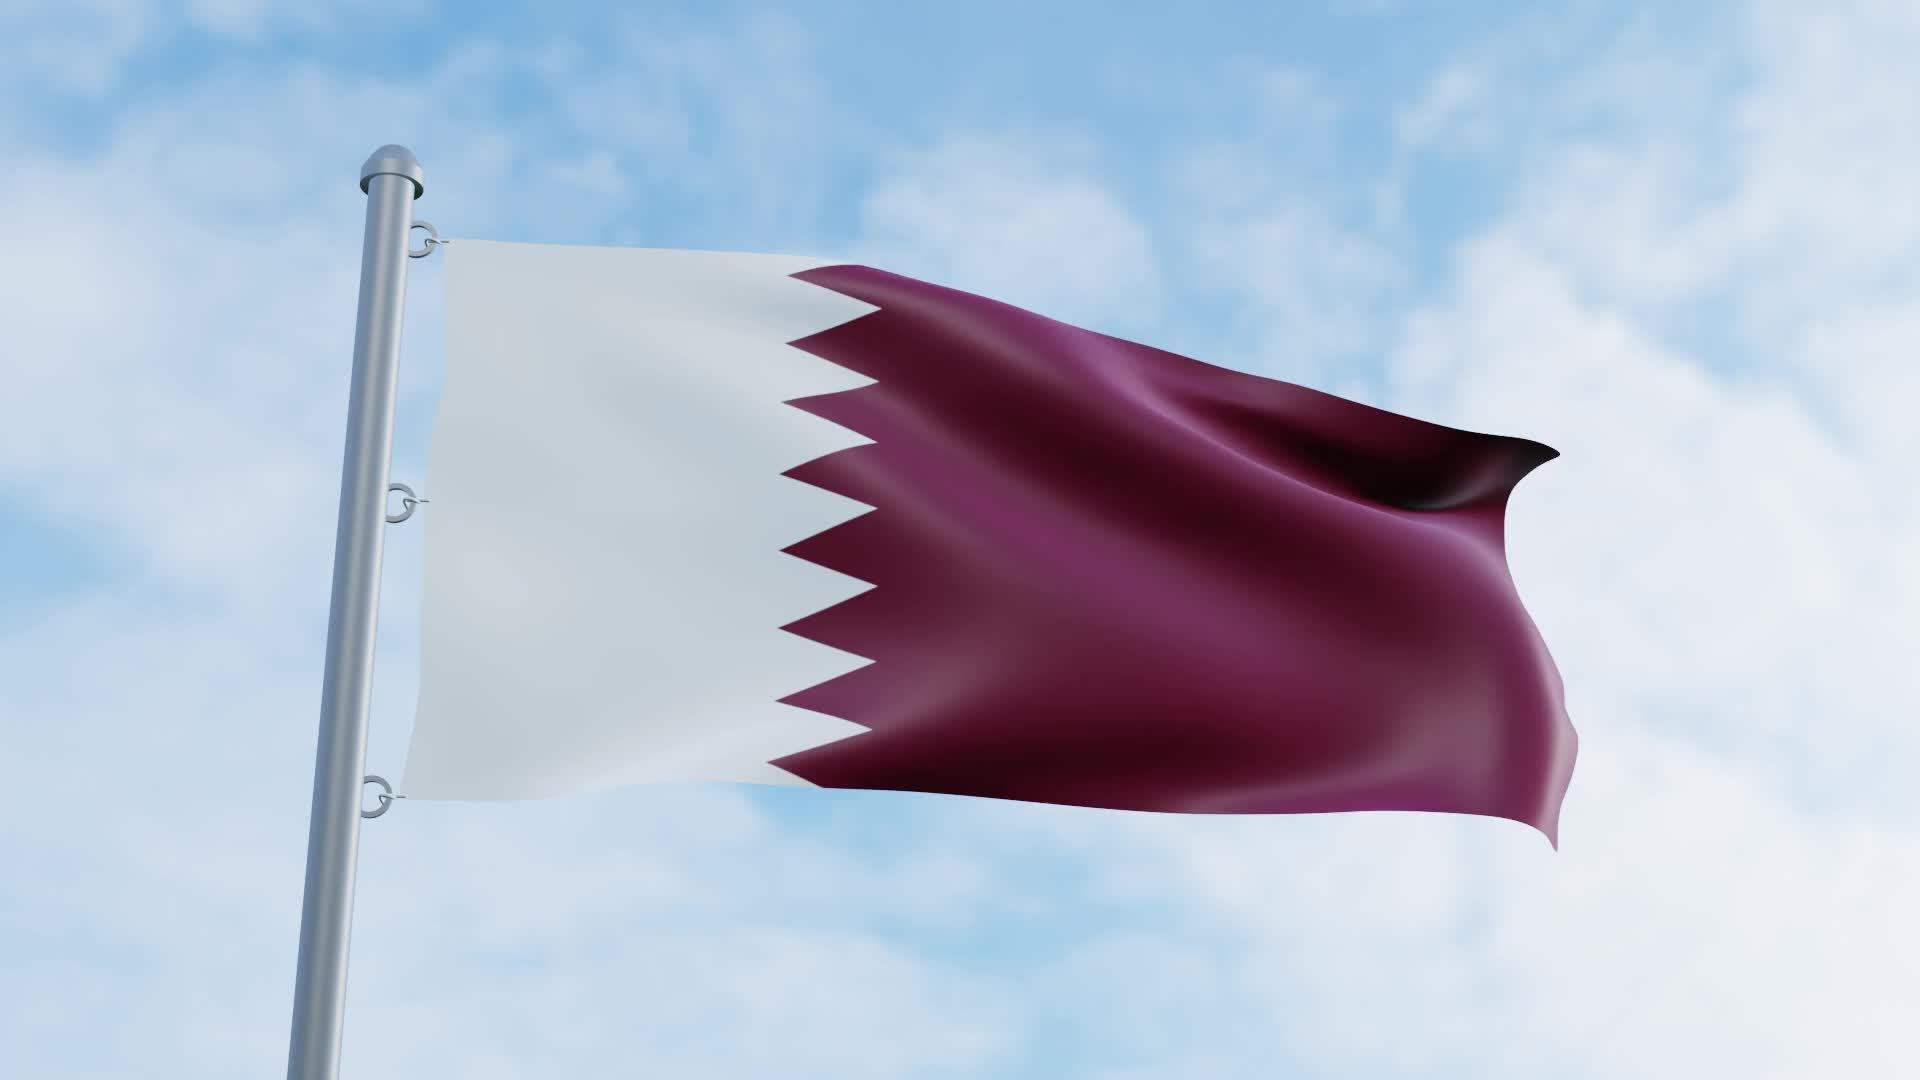 Qatar mediates release of hostages in exchange for a temporary ceasefire in Gaza